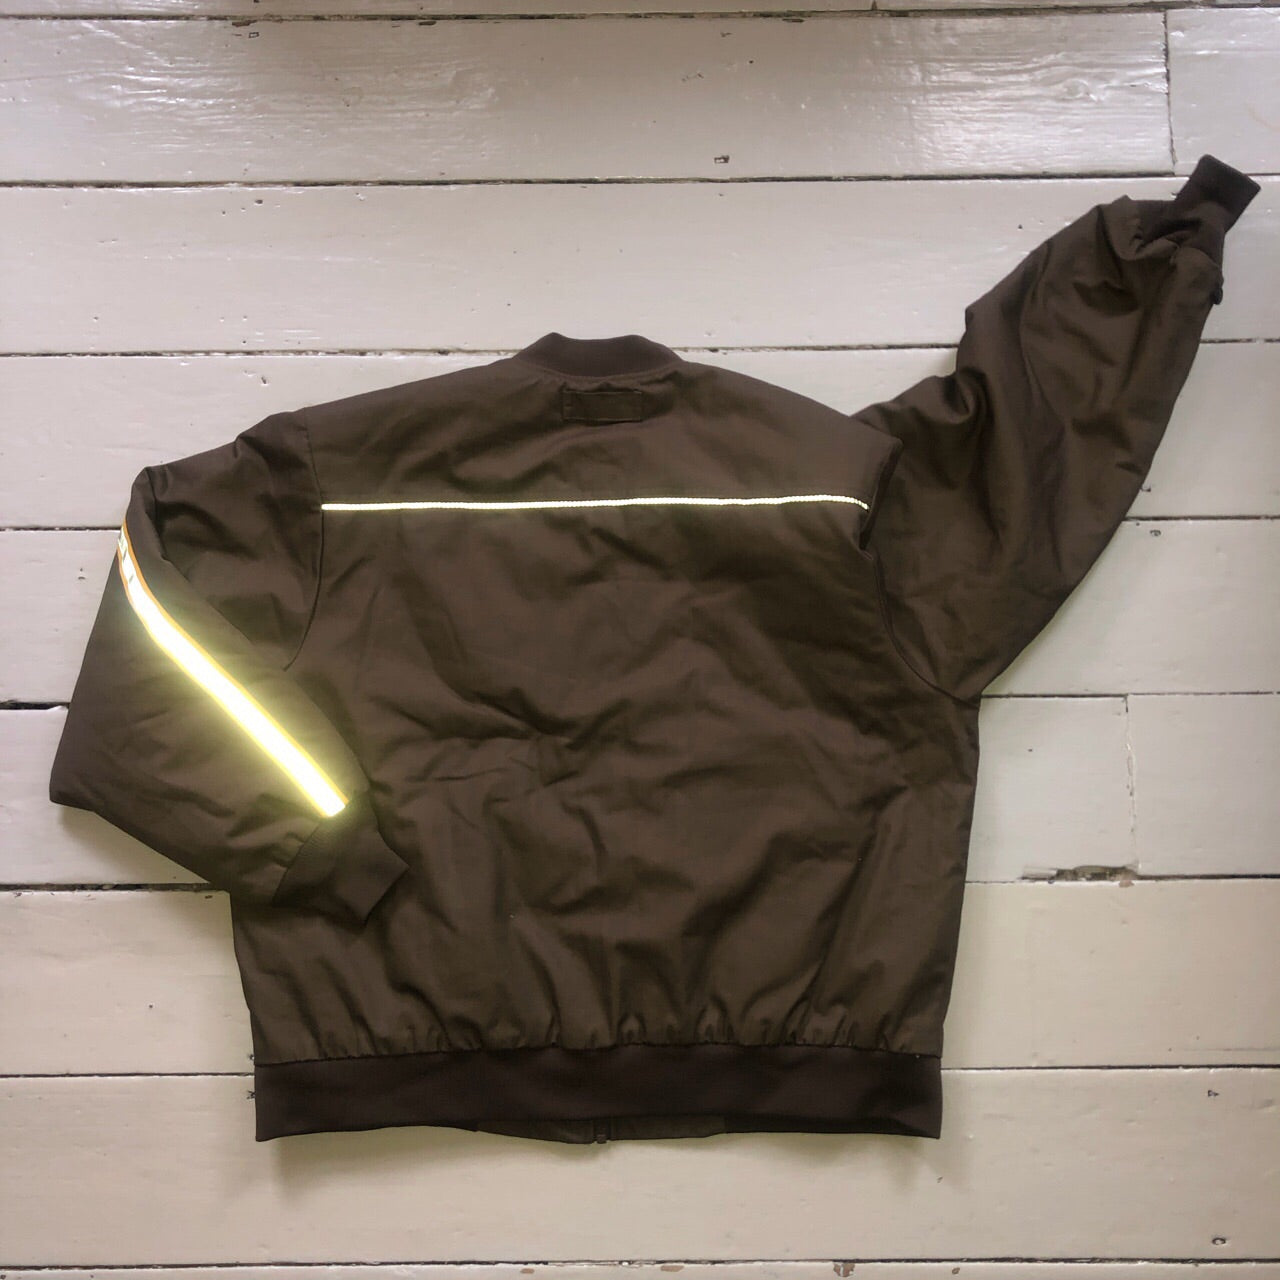 UPS Quilter Brown Bomber Jacket (Large)